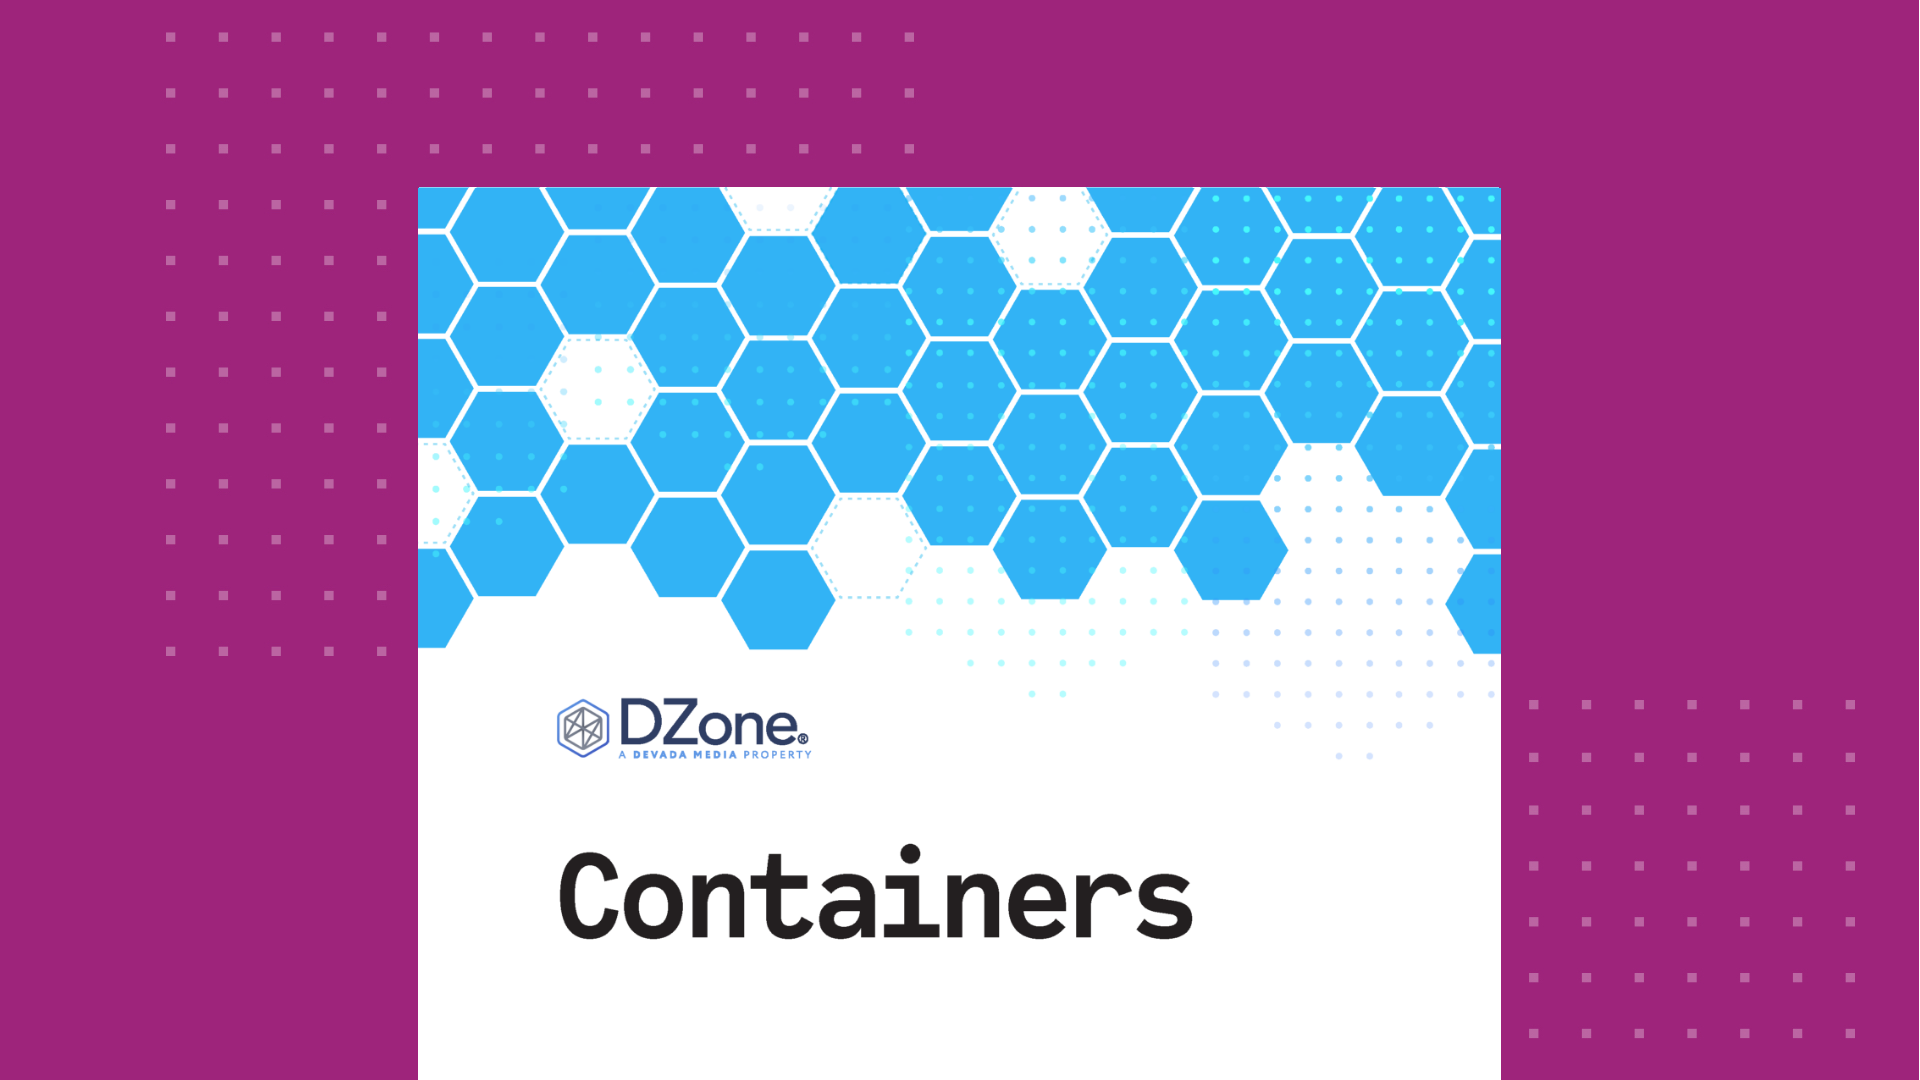 Introducing the 2021 DZone Trend Report: Containers